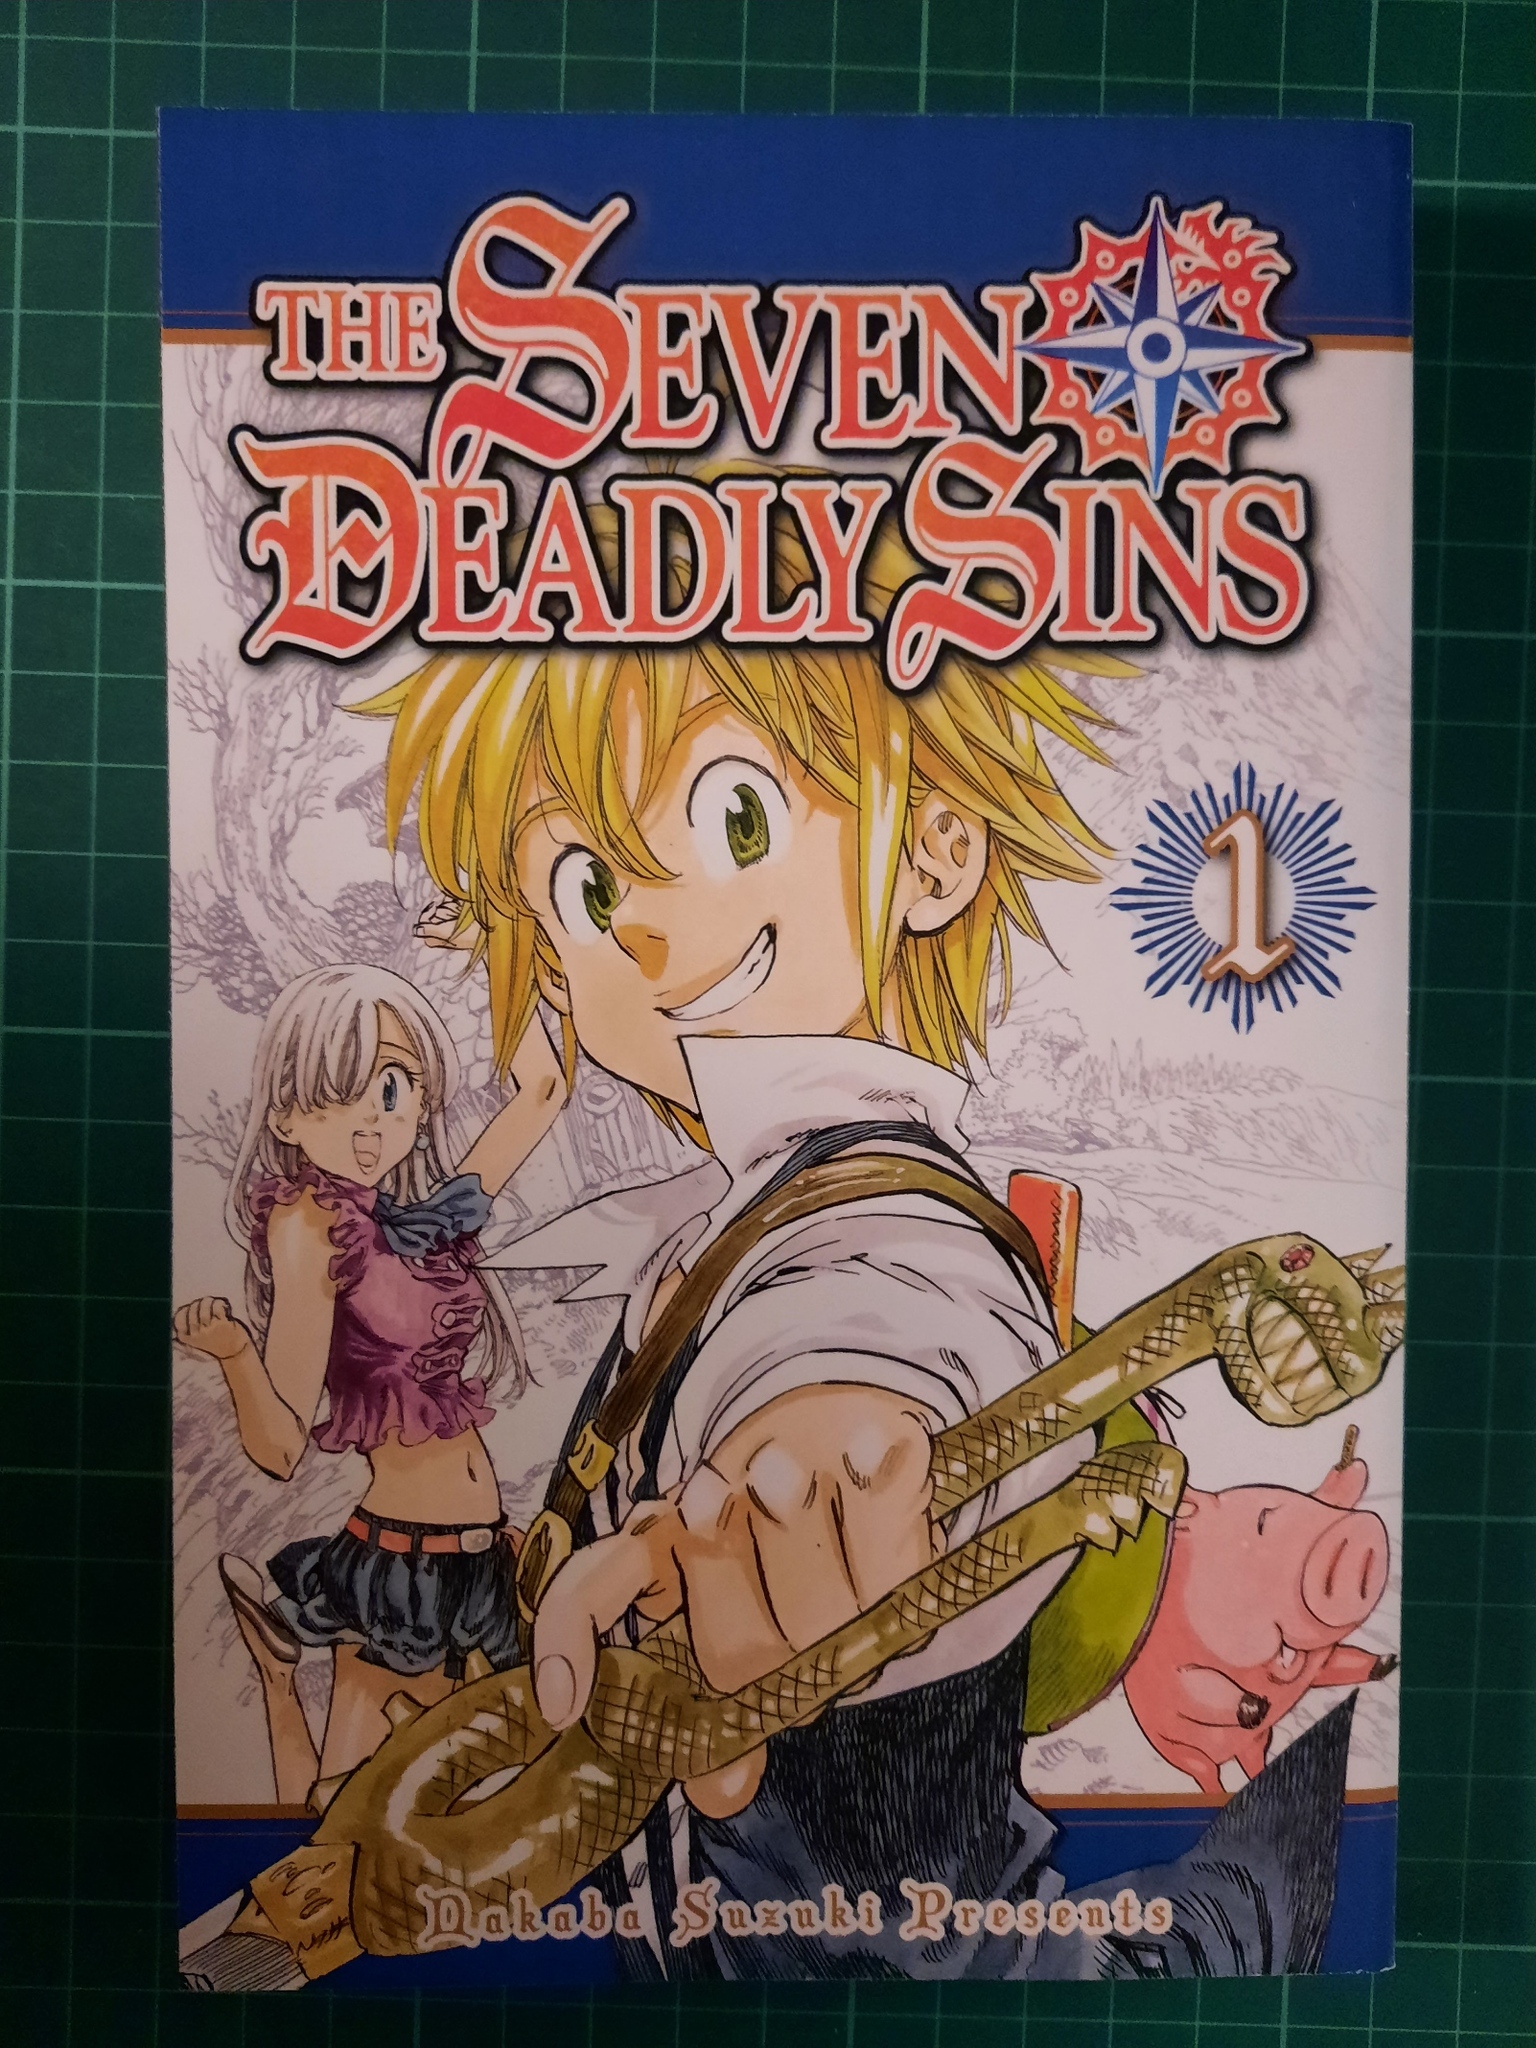 The seven deadly sins #1